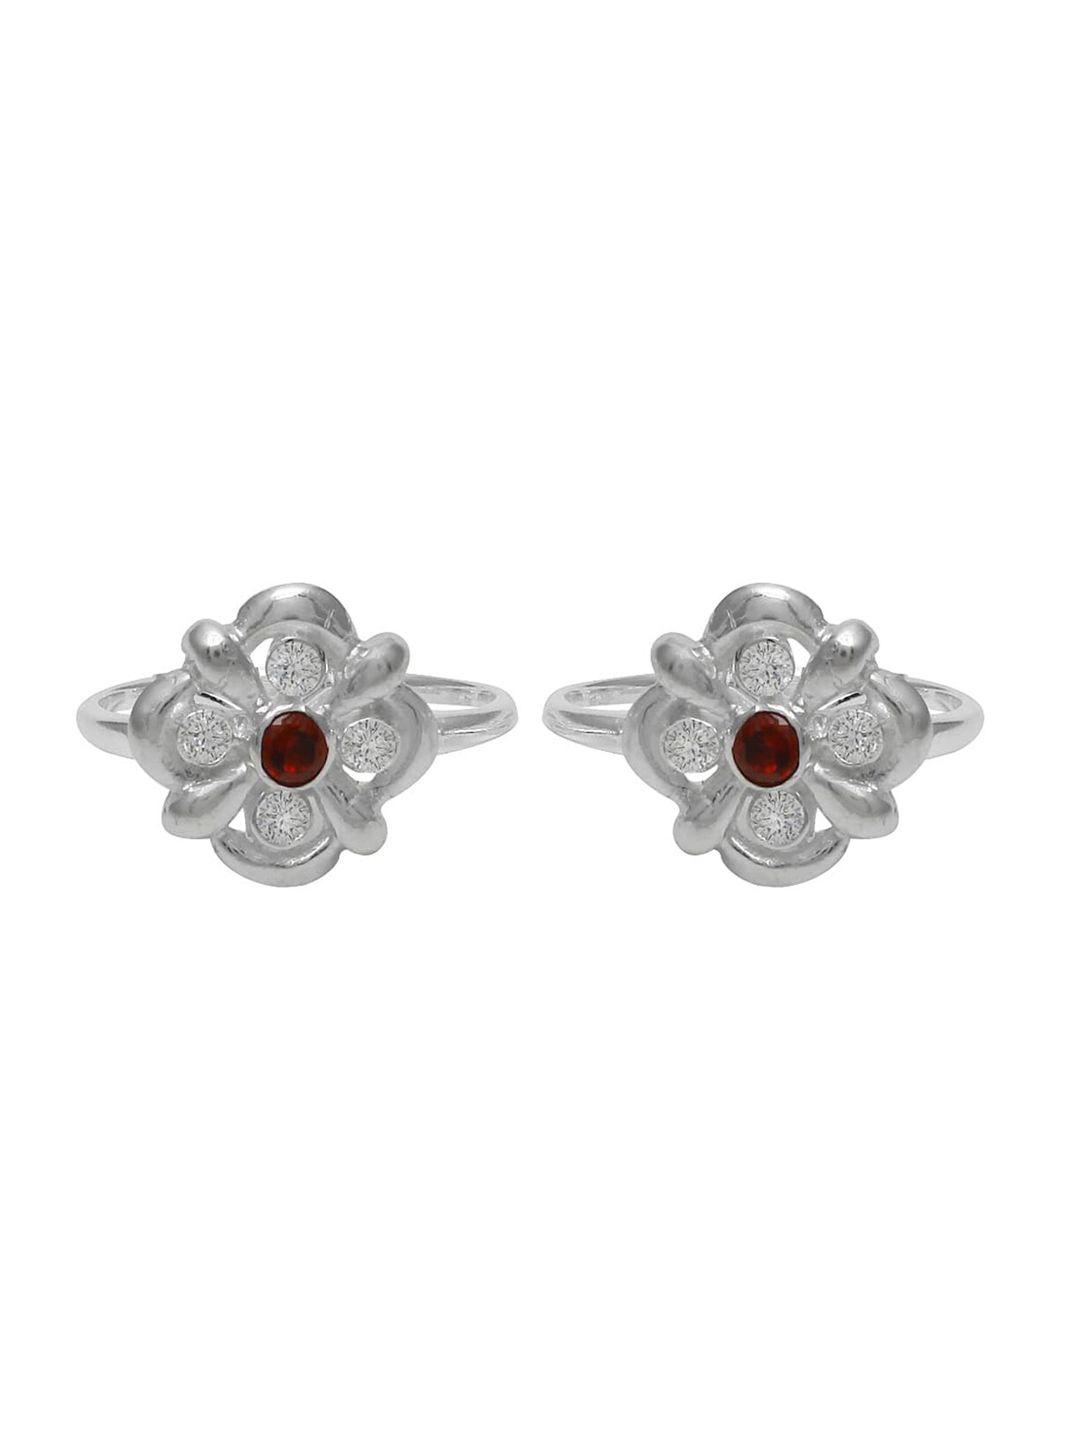 abhooshan-set-of-2-92.5-sterling-silver-cz-studded-adjustable-toe-rings